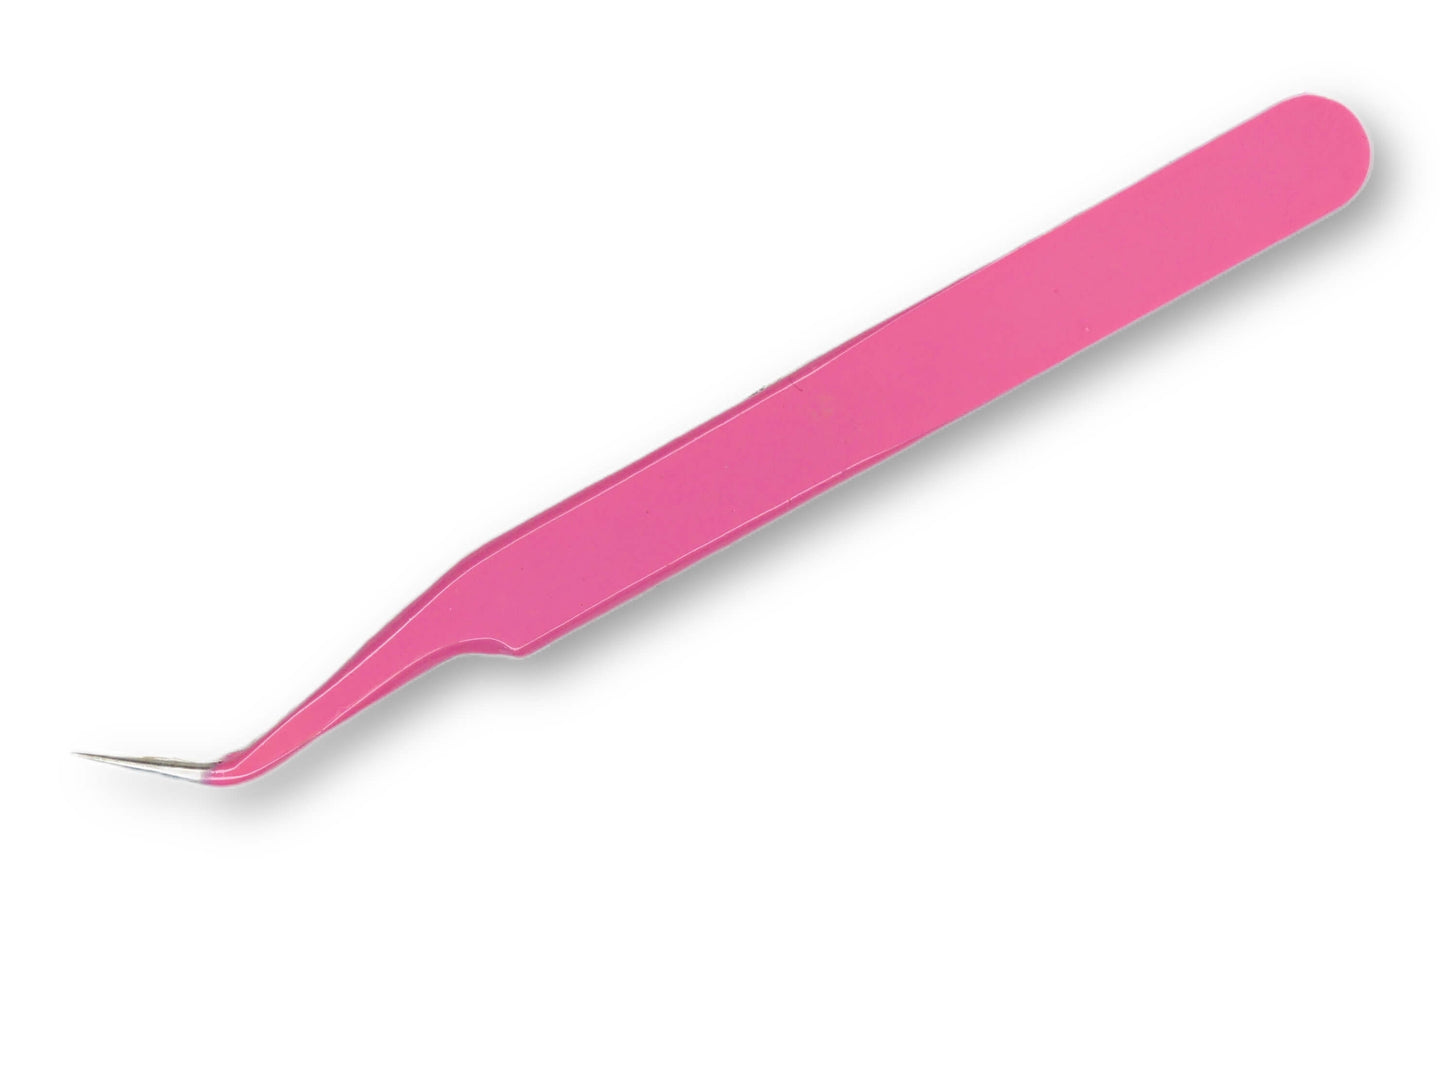 Pointy Curved Nail Art Tweezer ( Pink ) - My Little Nail Art Shop